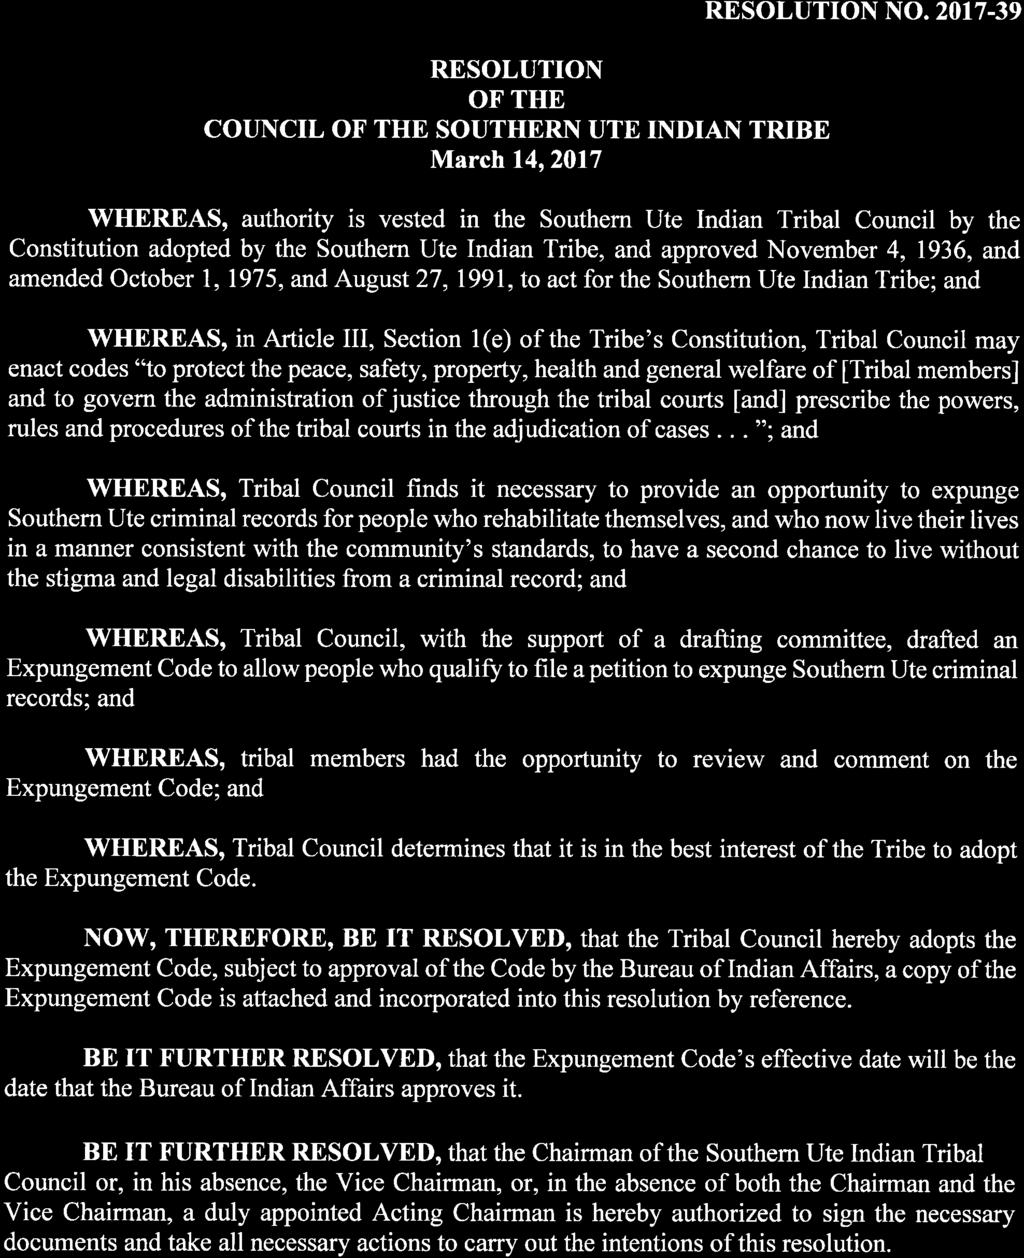 RESOLUTION OF THE COUNCIL OF THE SOUTHERN UTE INDIAN TRIBE March 14,2017 RESOLUTION NO. 2017.